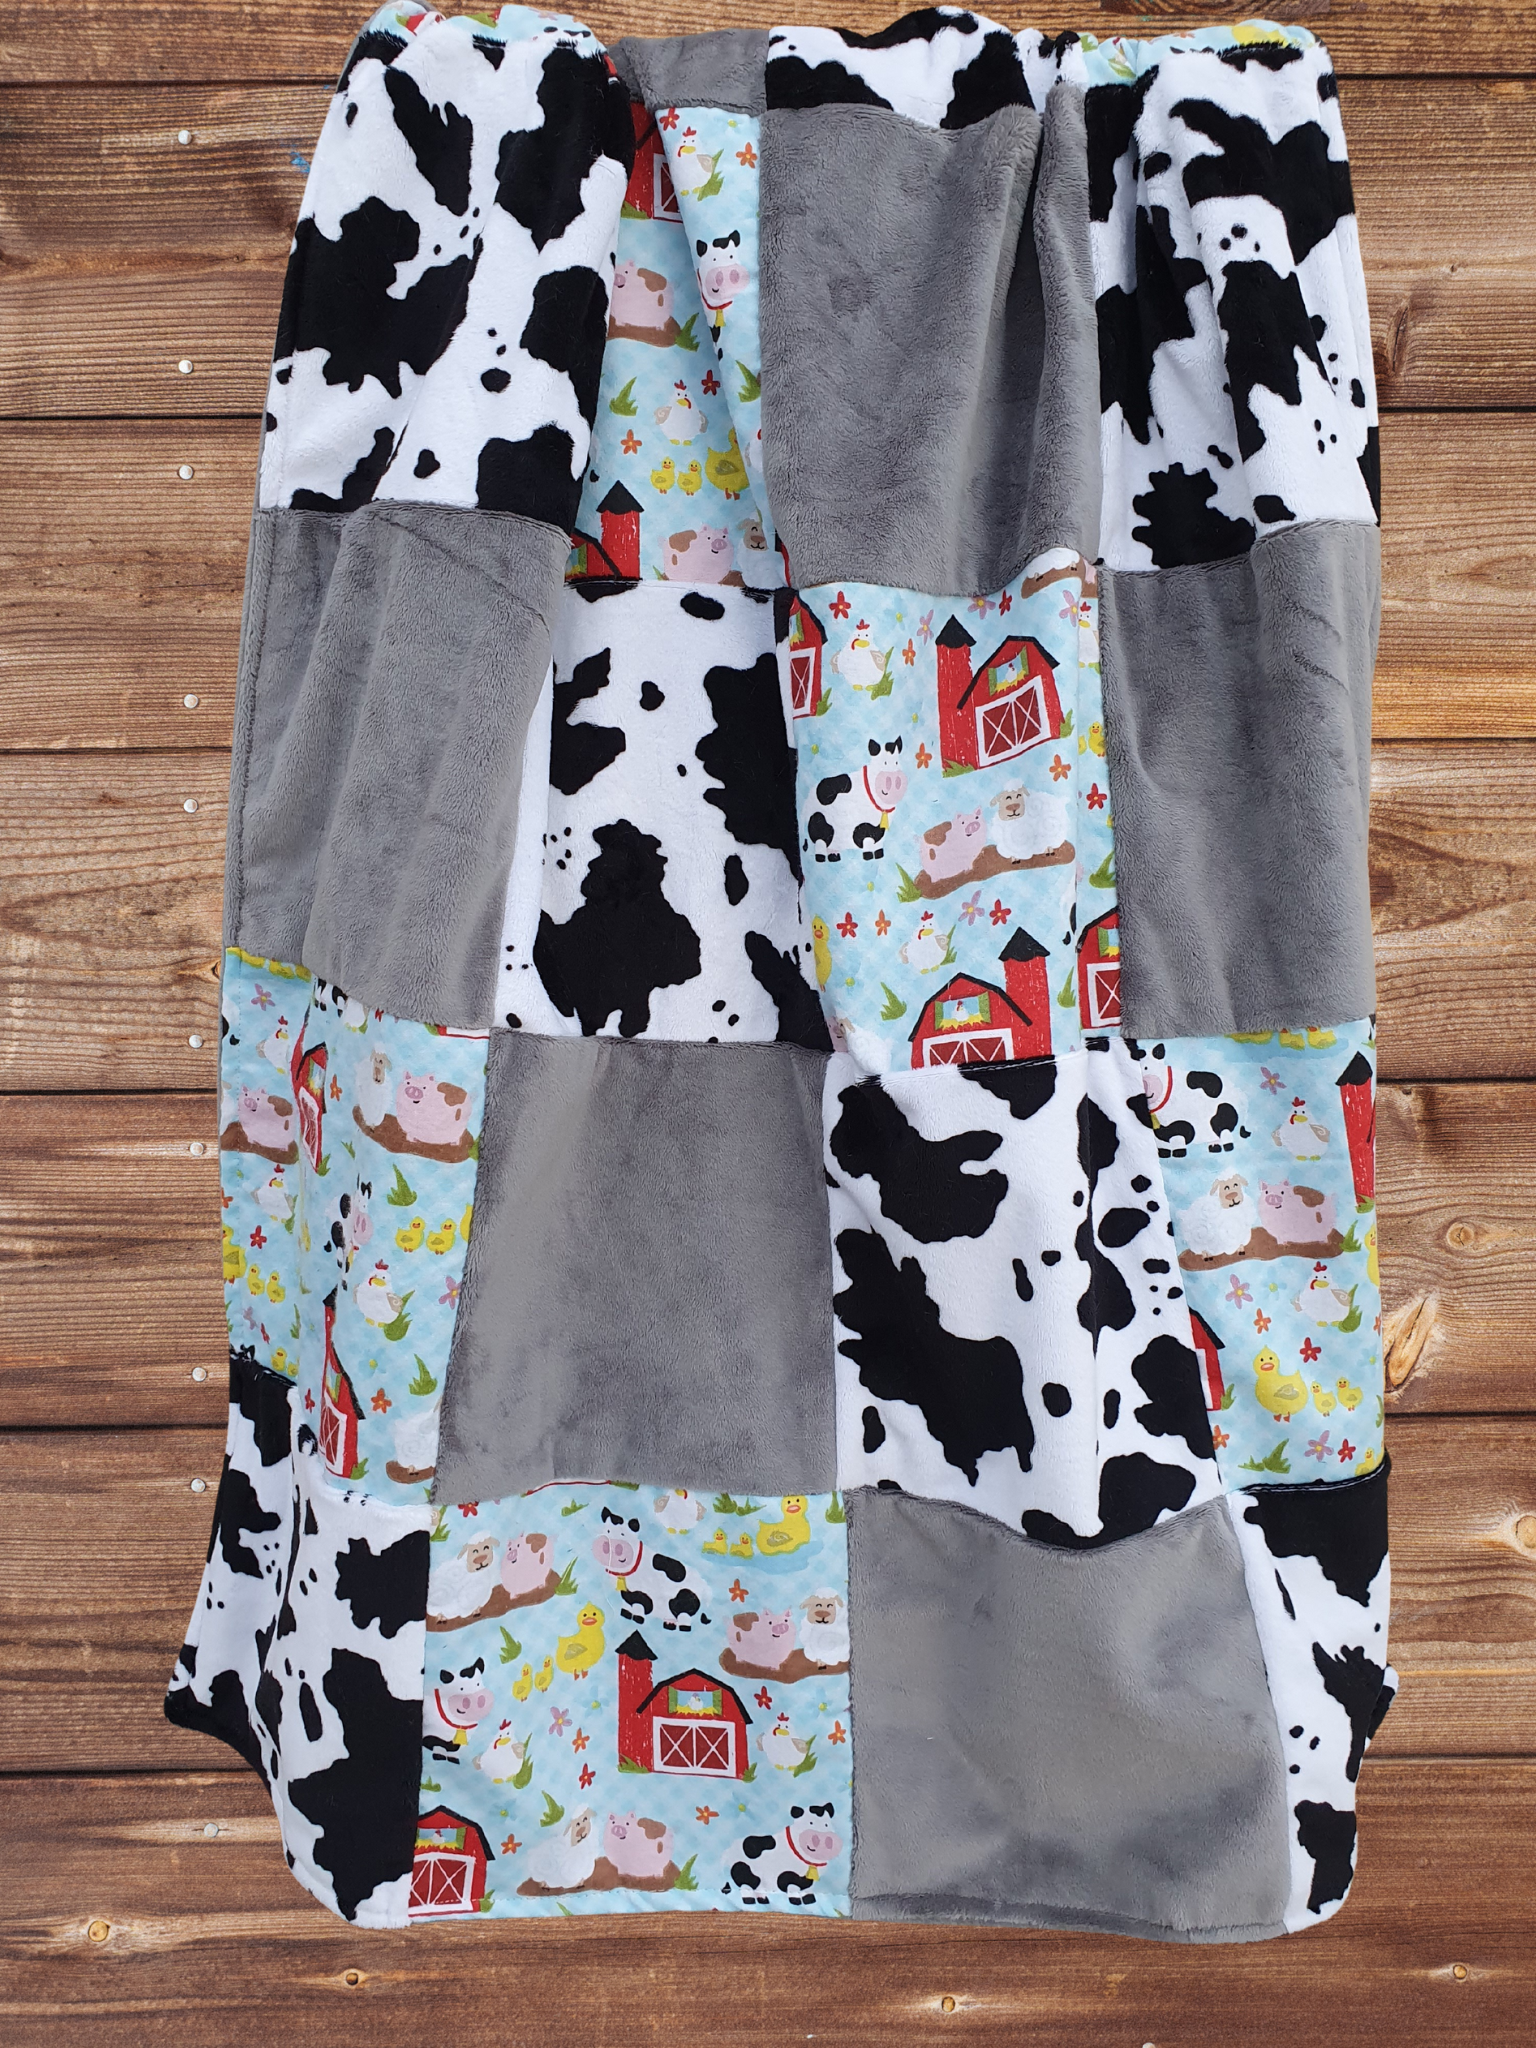 Patchwork Blanket - Farm Animals and Black White Cow Print Blanket - DBC Baby Bedding Co 